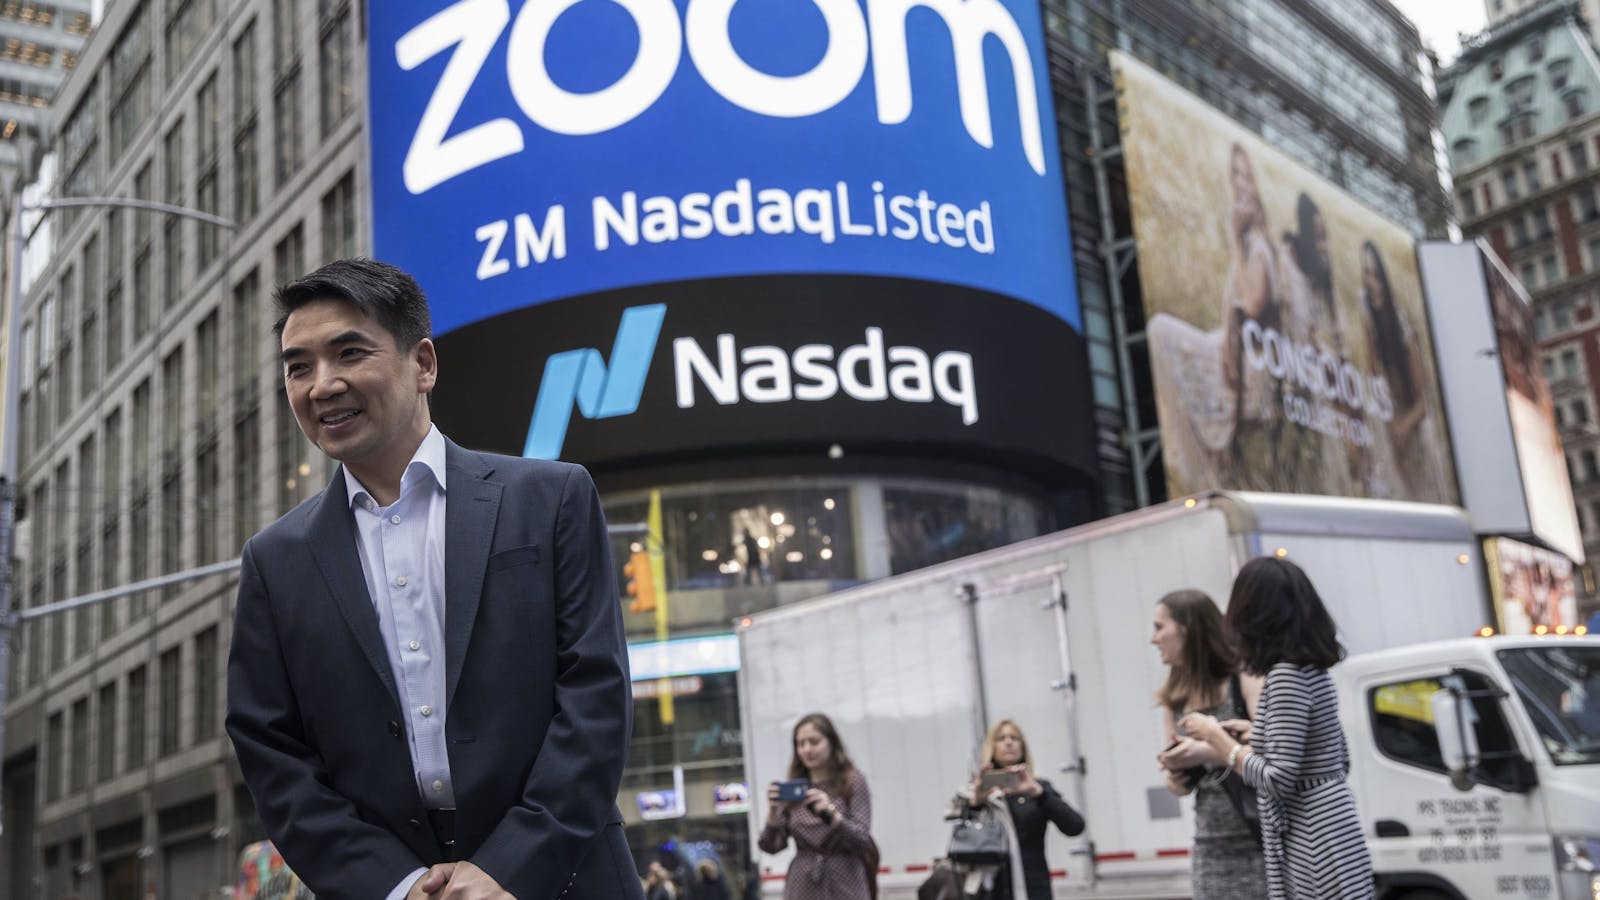 Zoom CEO Eric Yuan in front of the Nasdaq the day Zoom went public in 2019. Photo by Bloomberg.